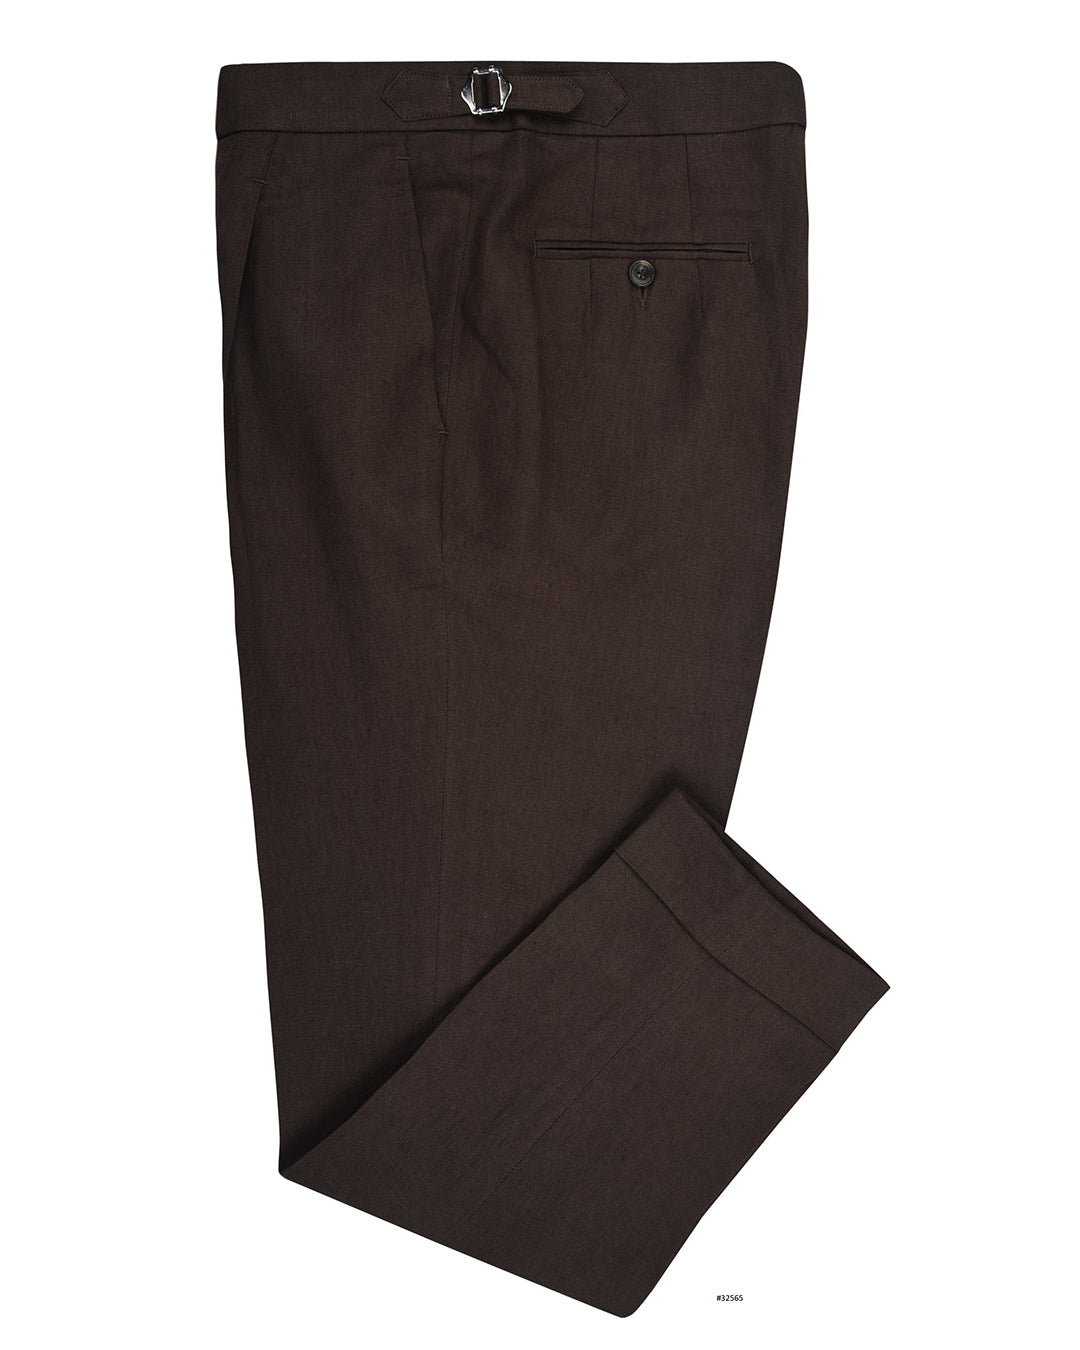 Side view of custom linen canvas pants for men by Luxire in dark brown